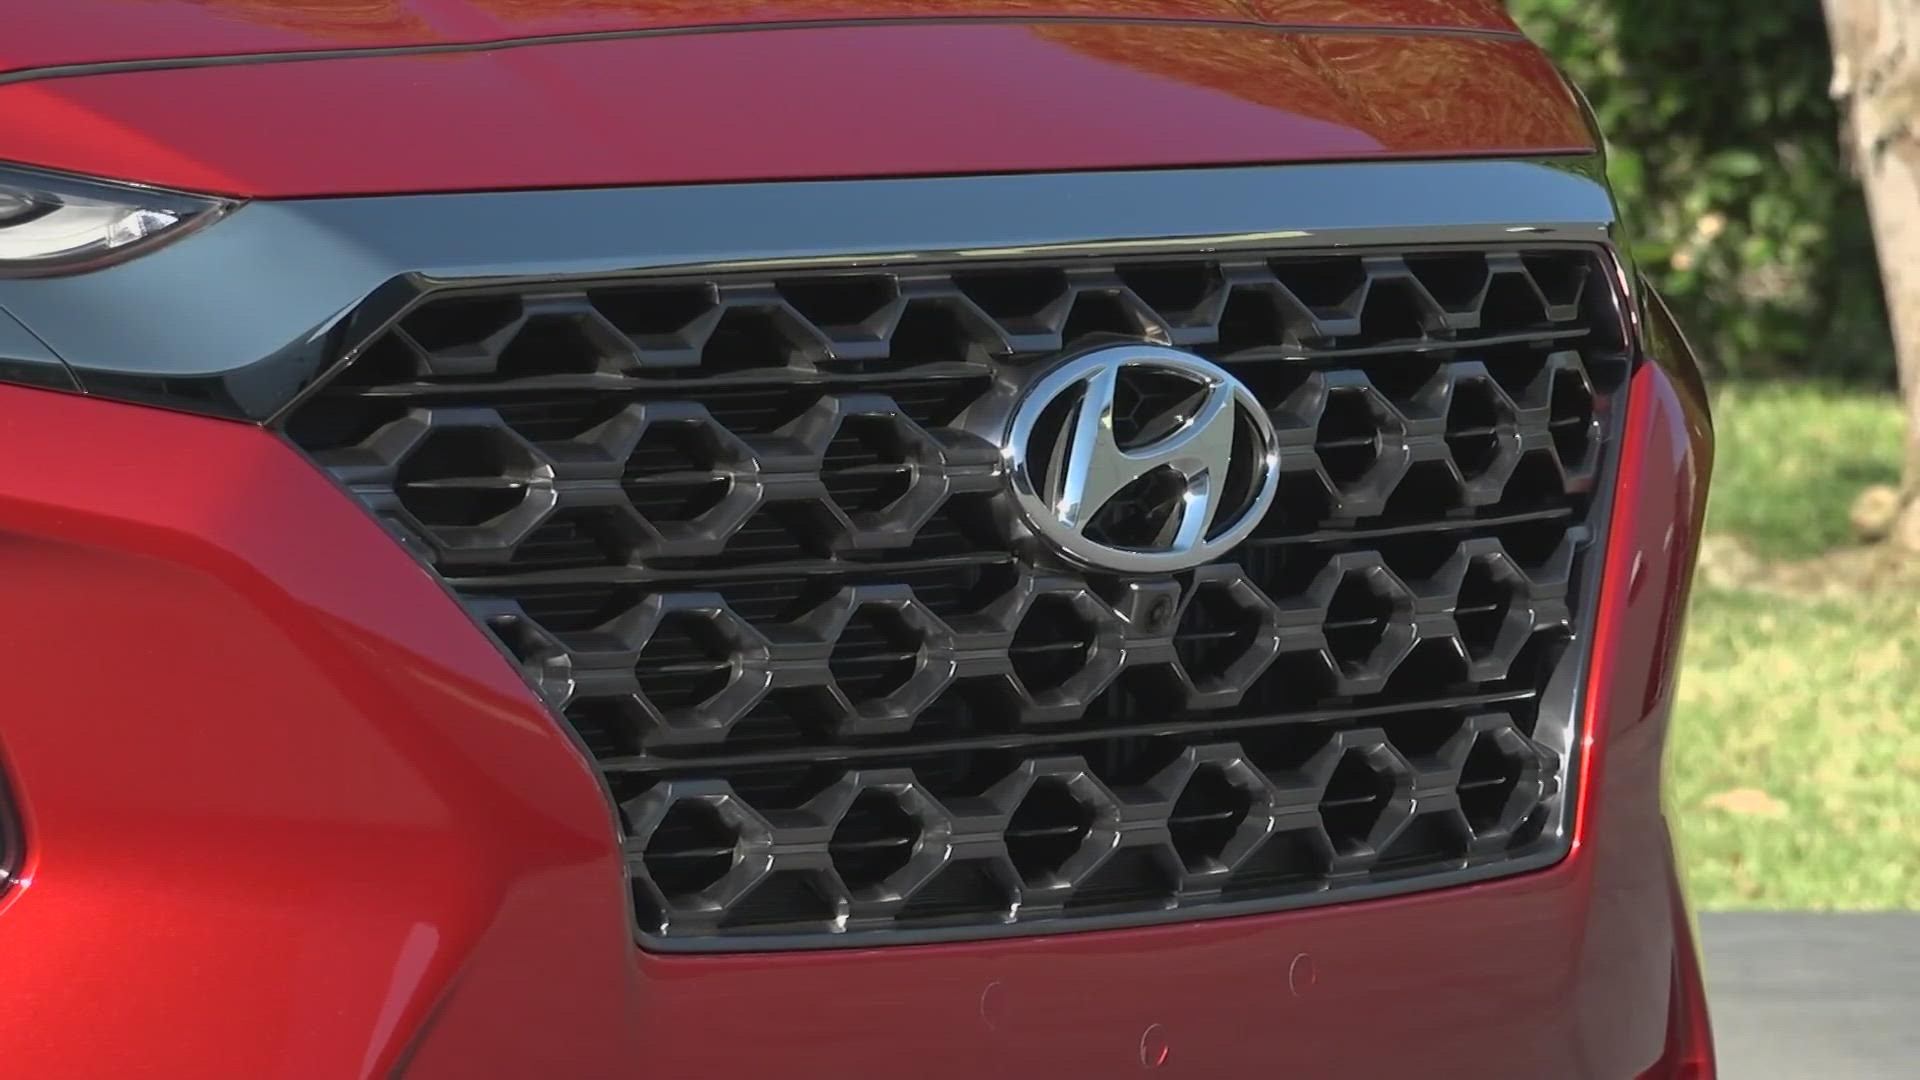 Thousands of Hyundais and Kias have been stolen across the nation and in the St. Louis region after a technology gap exploited on social media.